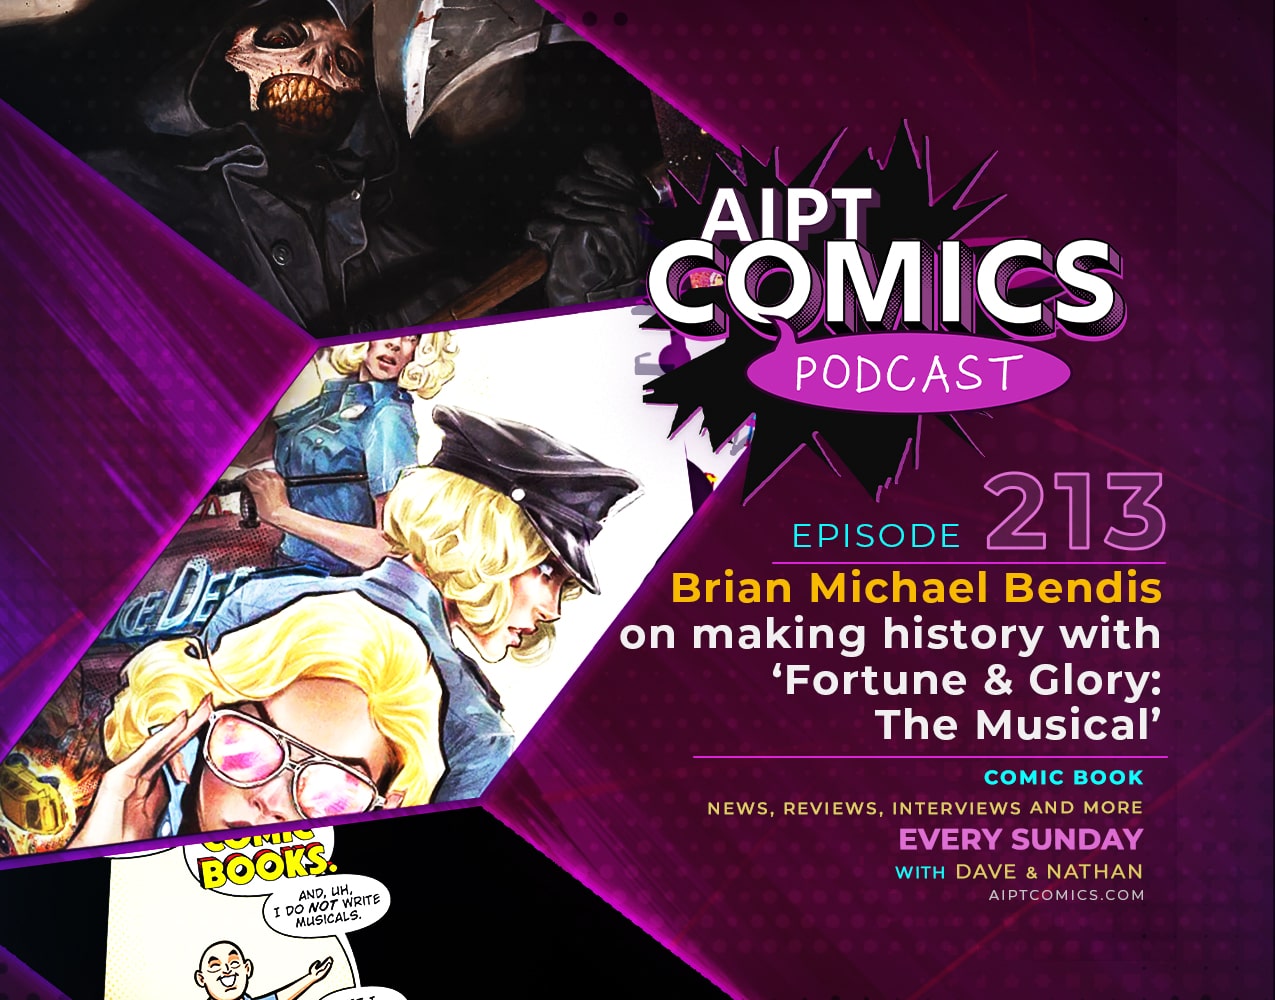 AIPT Comics Podcast episode 213: Brian Michael Bendis on making history with ‘Fortune & Glory: The Musical’